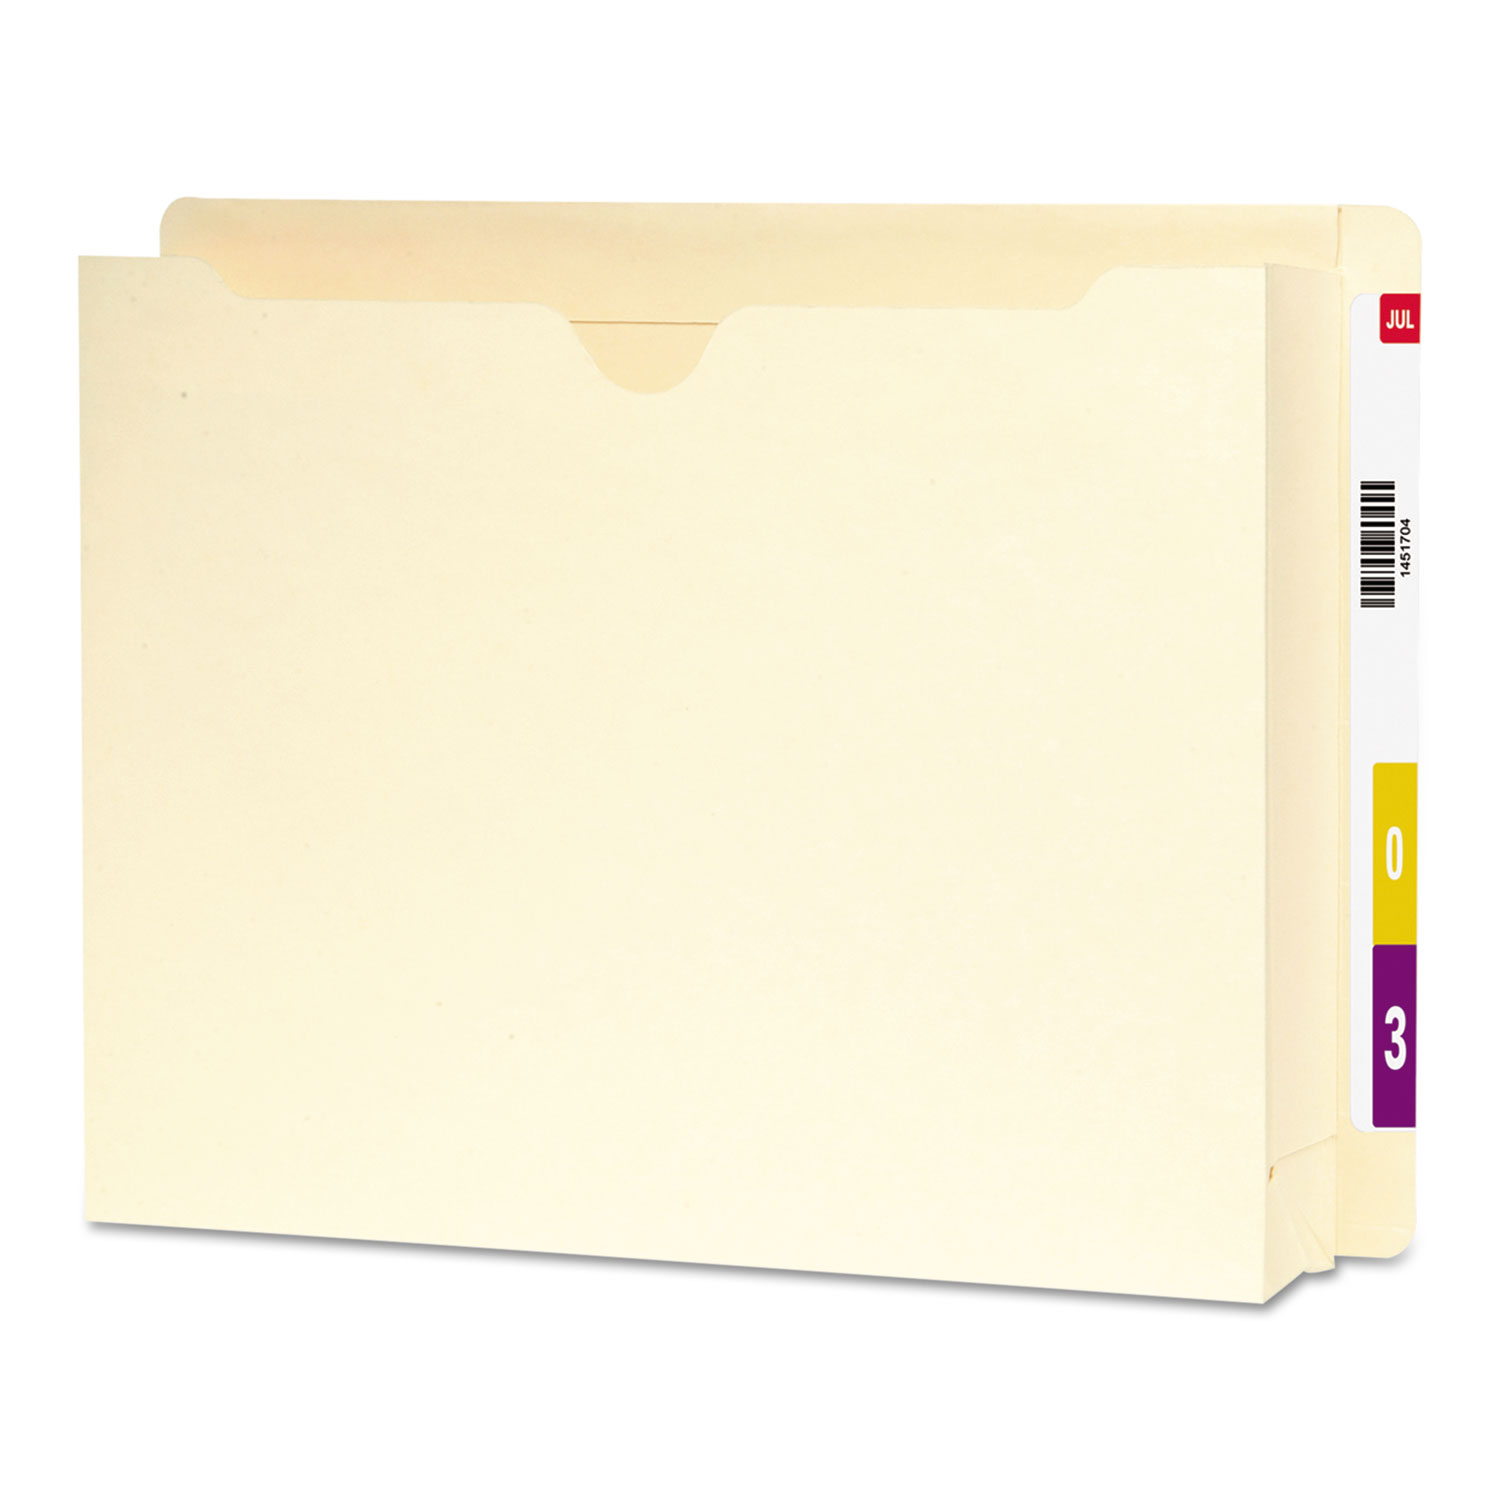  Smead 76910 Heavyweight End Tab File Jacket with 2 Expansion, Straight Tab, Letter Size, Manila, 25/Box (SMD76910) 